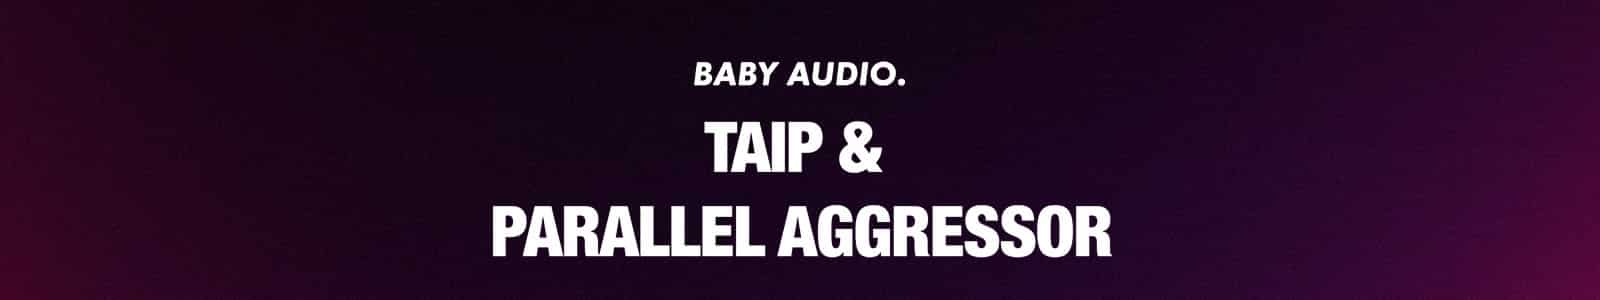 Parallel Aggressor & TAIP Bundle by Baby Audio